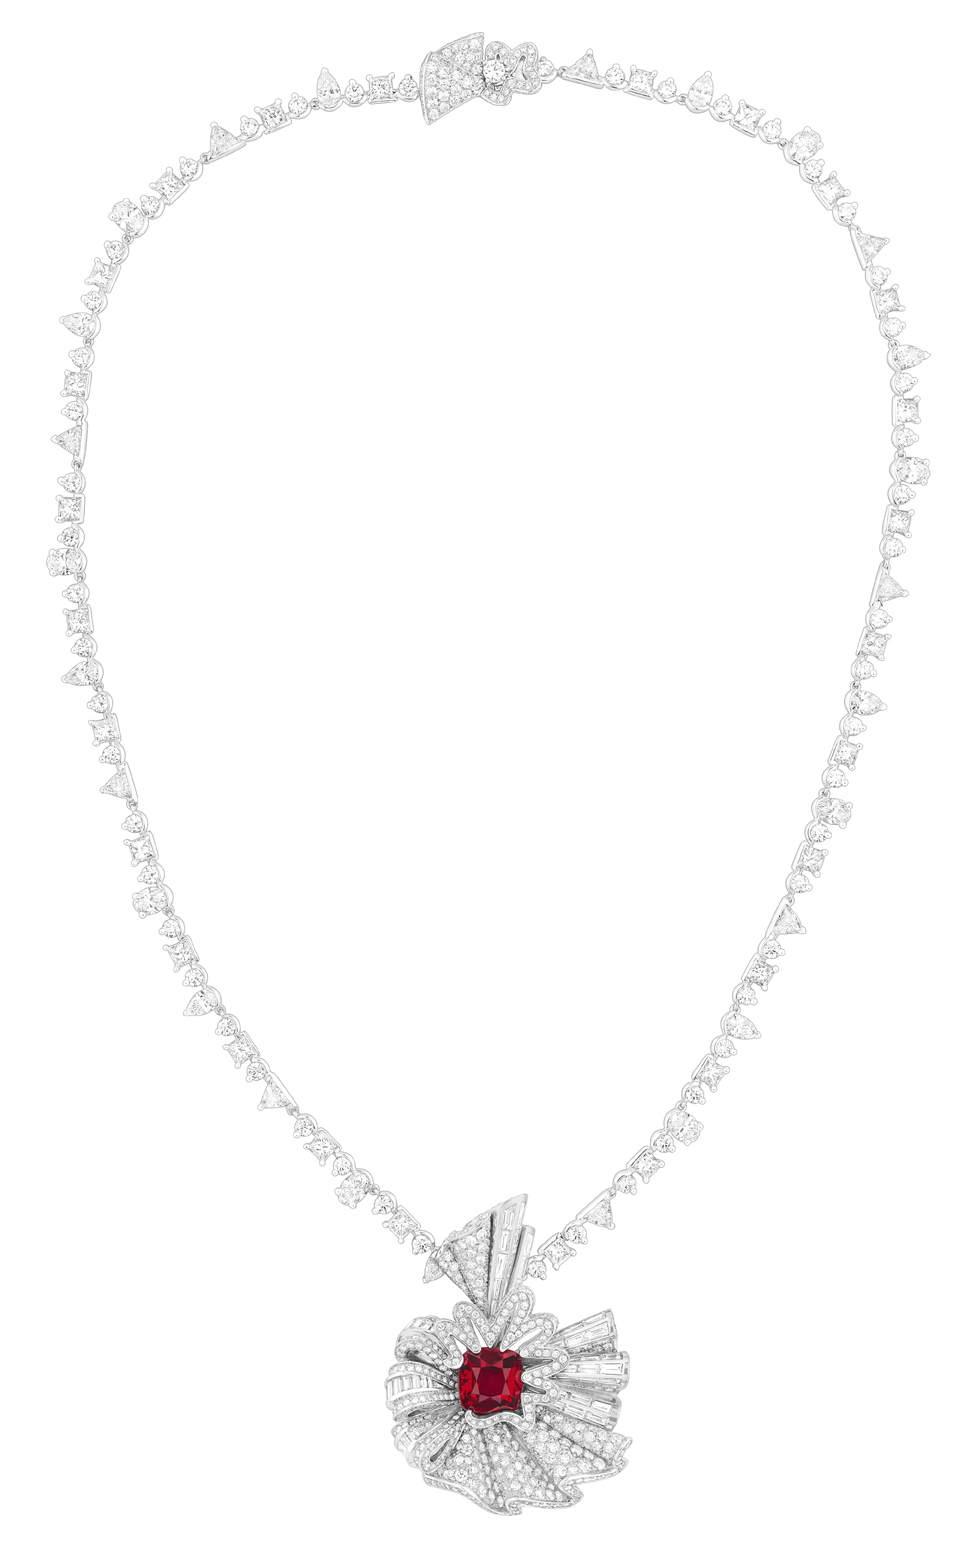 «COCOTTE RUBIS» NECKLACE BY DIOR